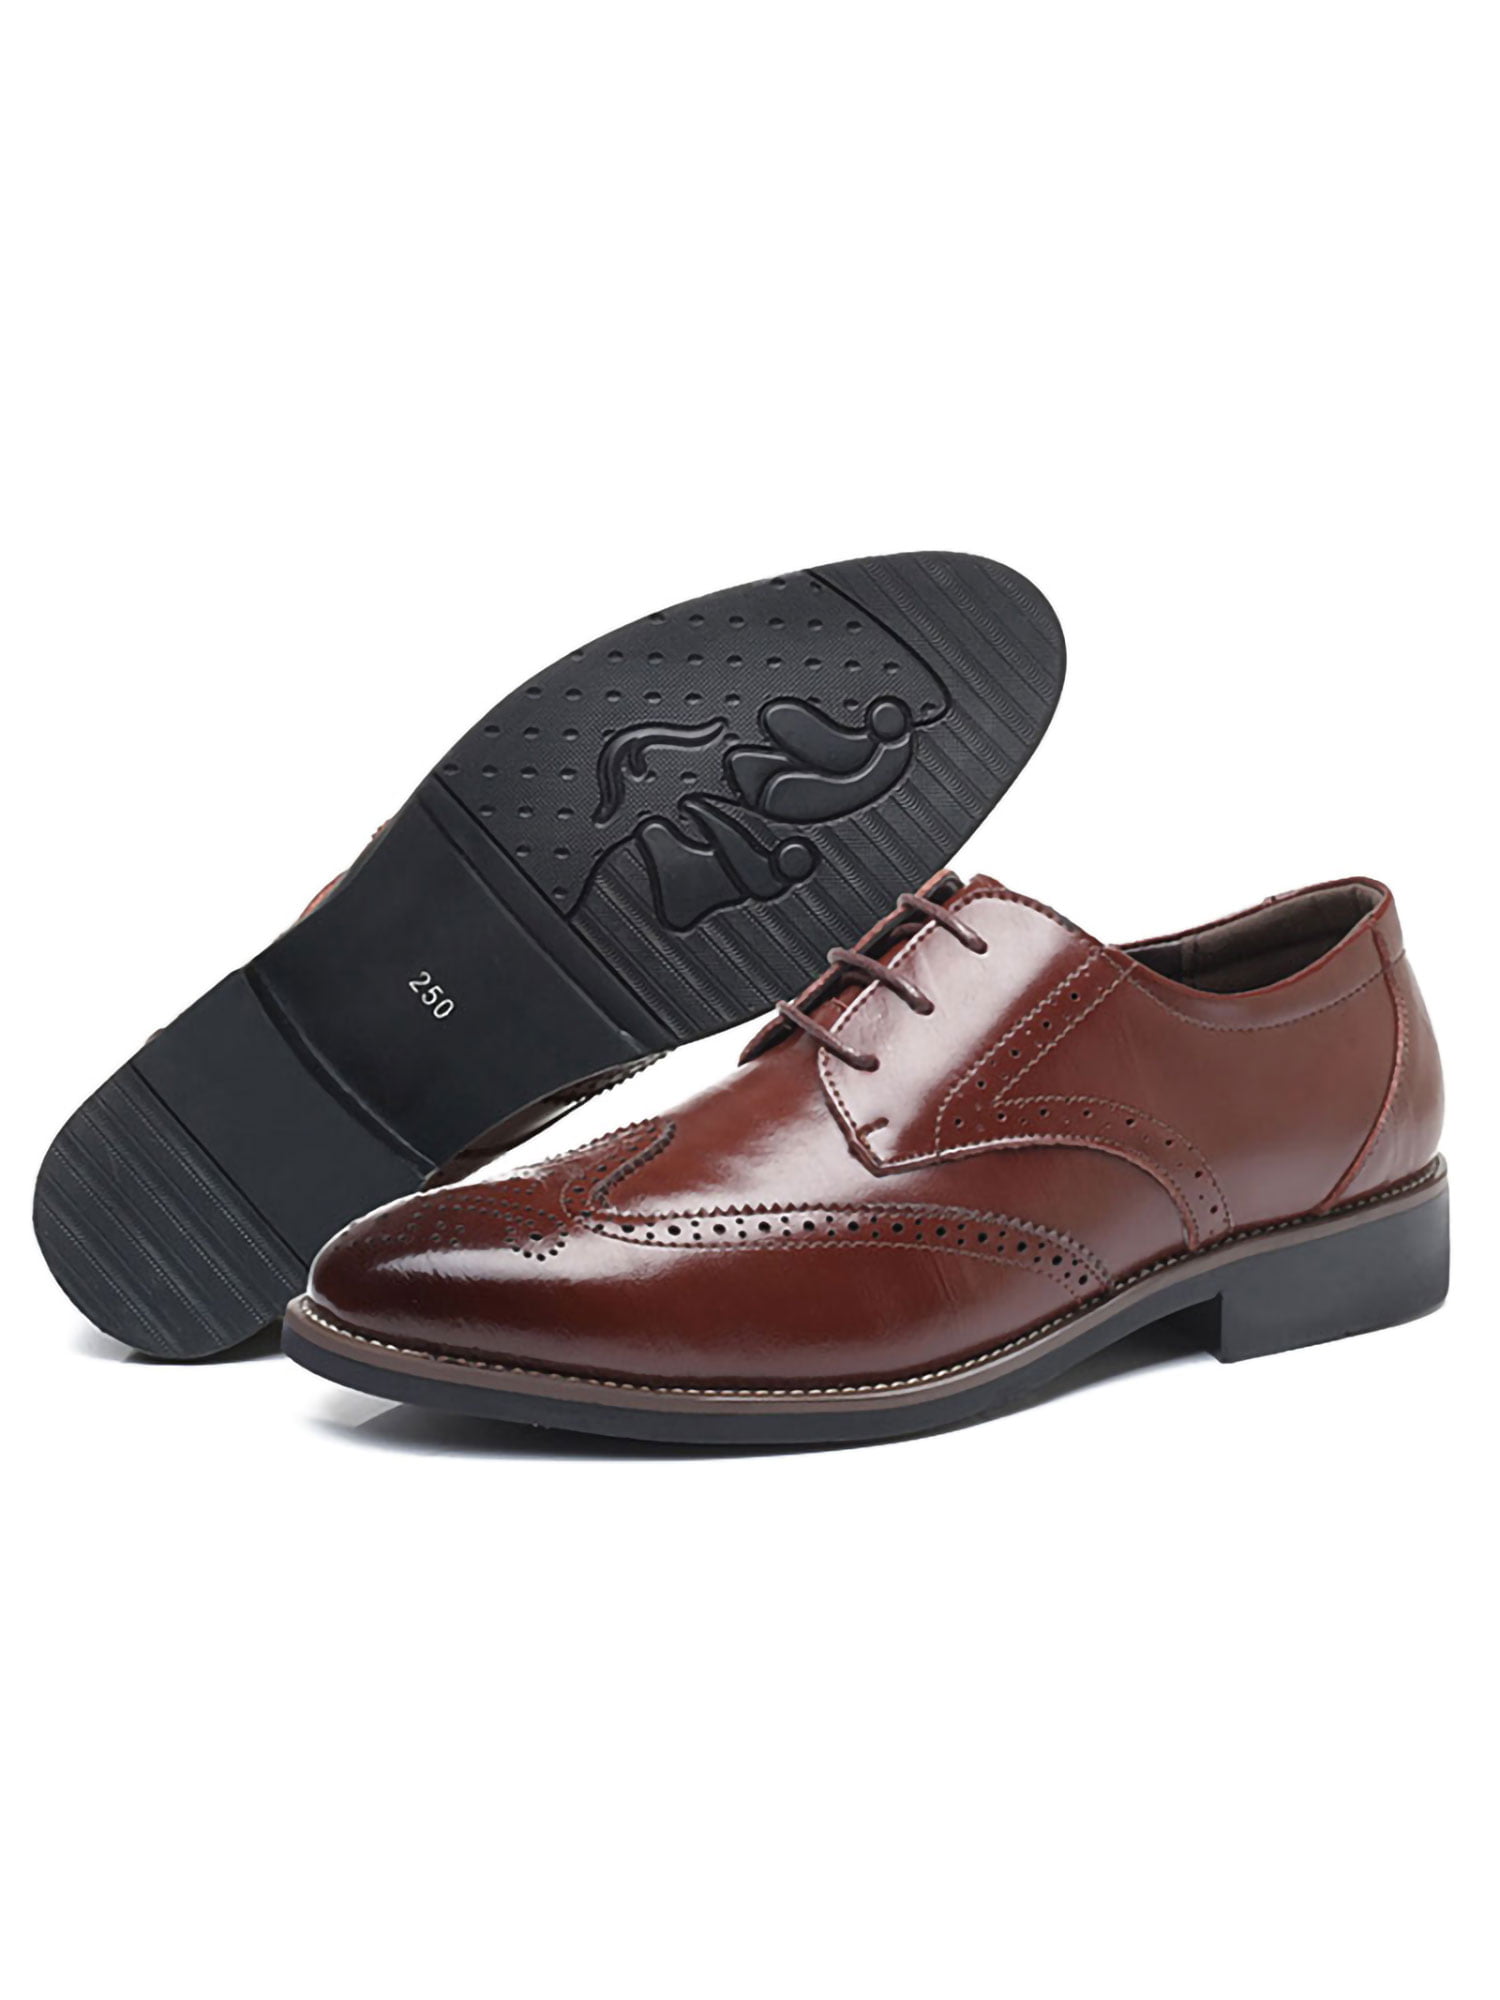 Details about   Mens Dress Formal Leather Shoes Pointy Toe Business Lace up Oxfords Work Office 